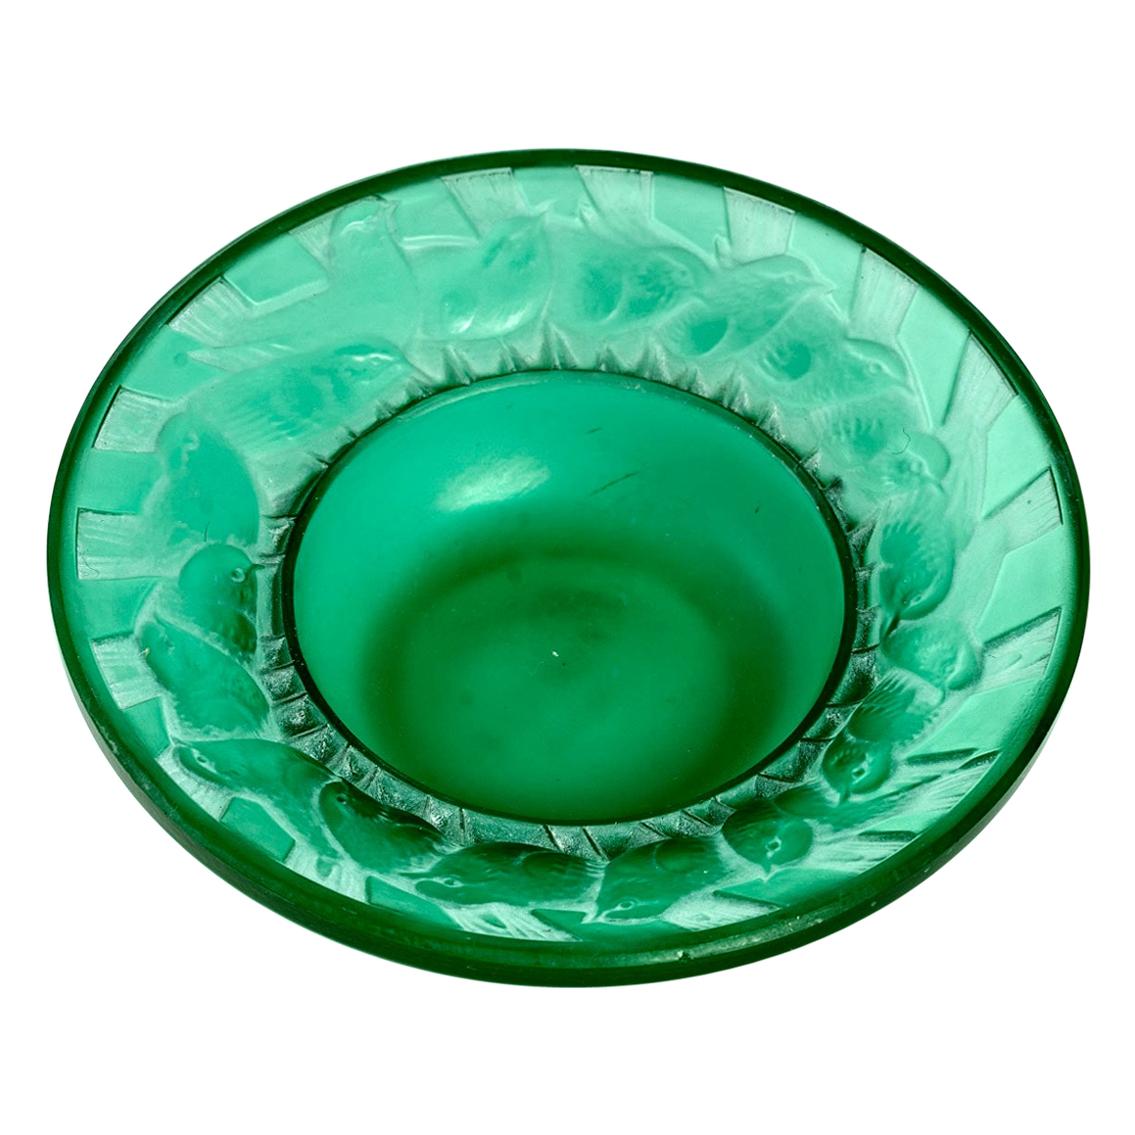 1931 René Lalique Irene Astray Pintray Emerald Green Glass with White Patina